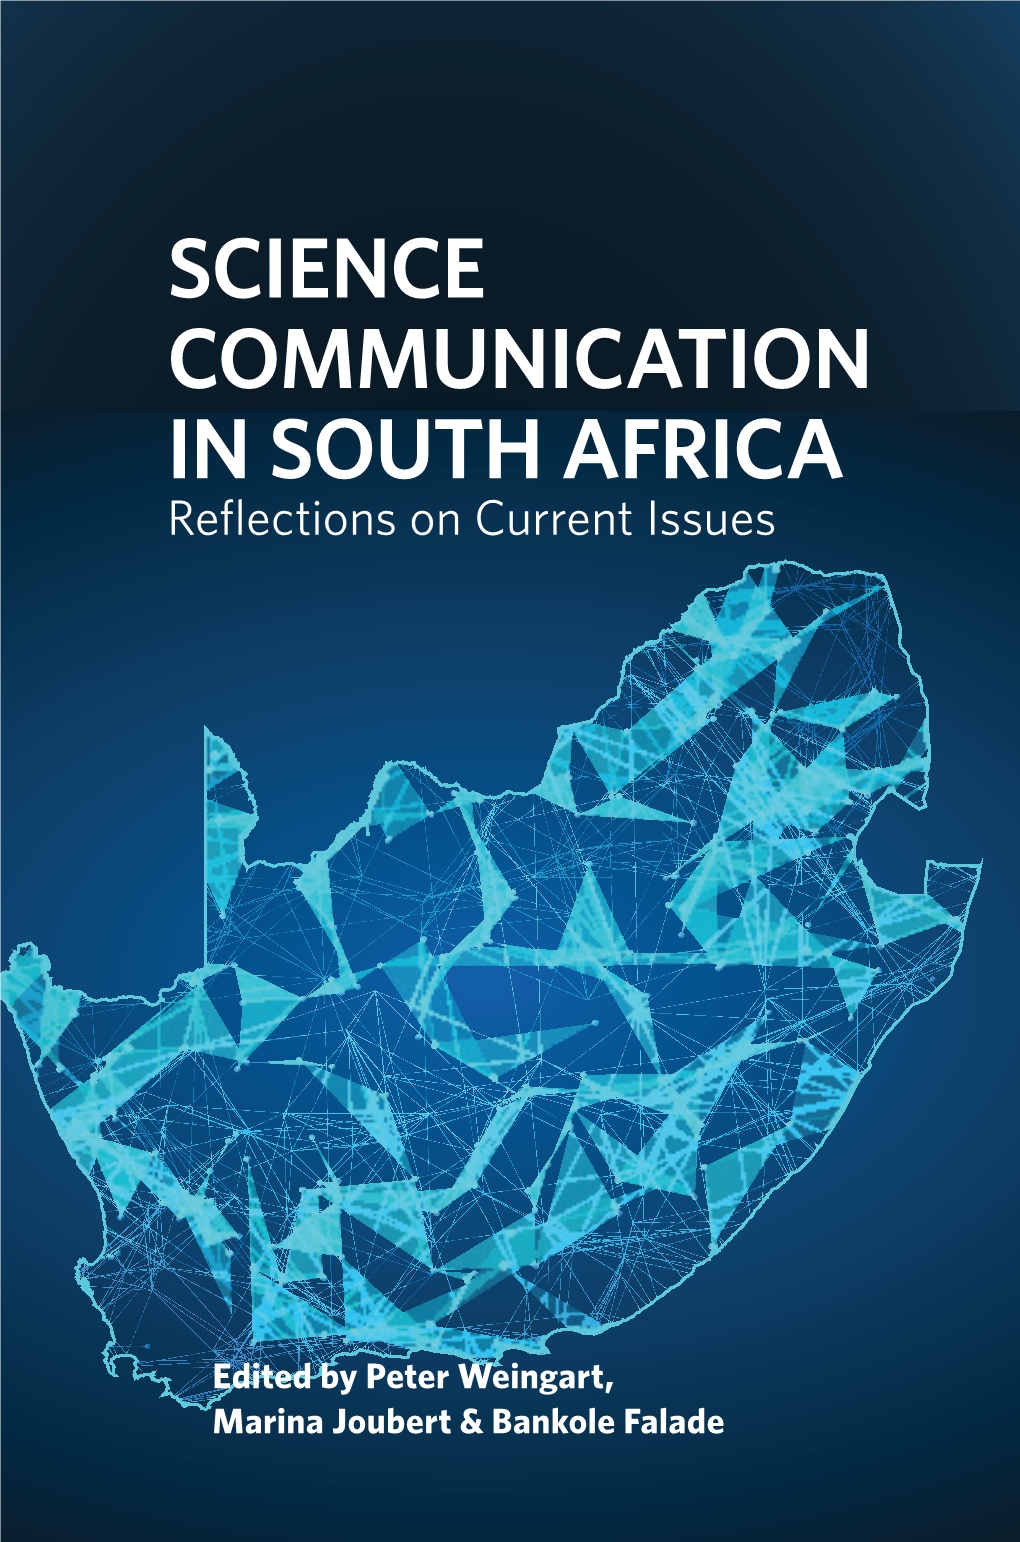 SCIENCE COMMUNICATION in SOUTH AFRICA Reflections on Current Issues